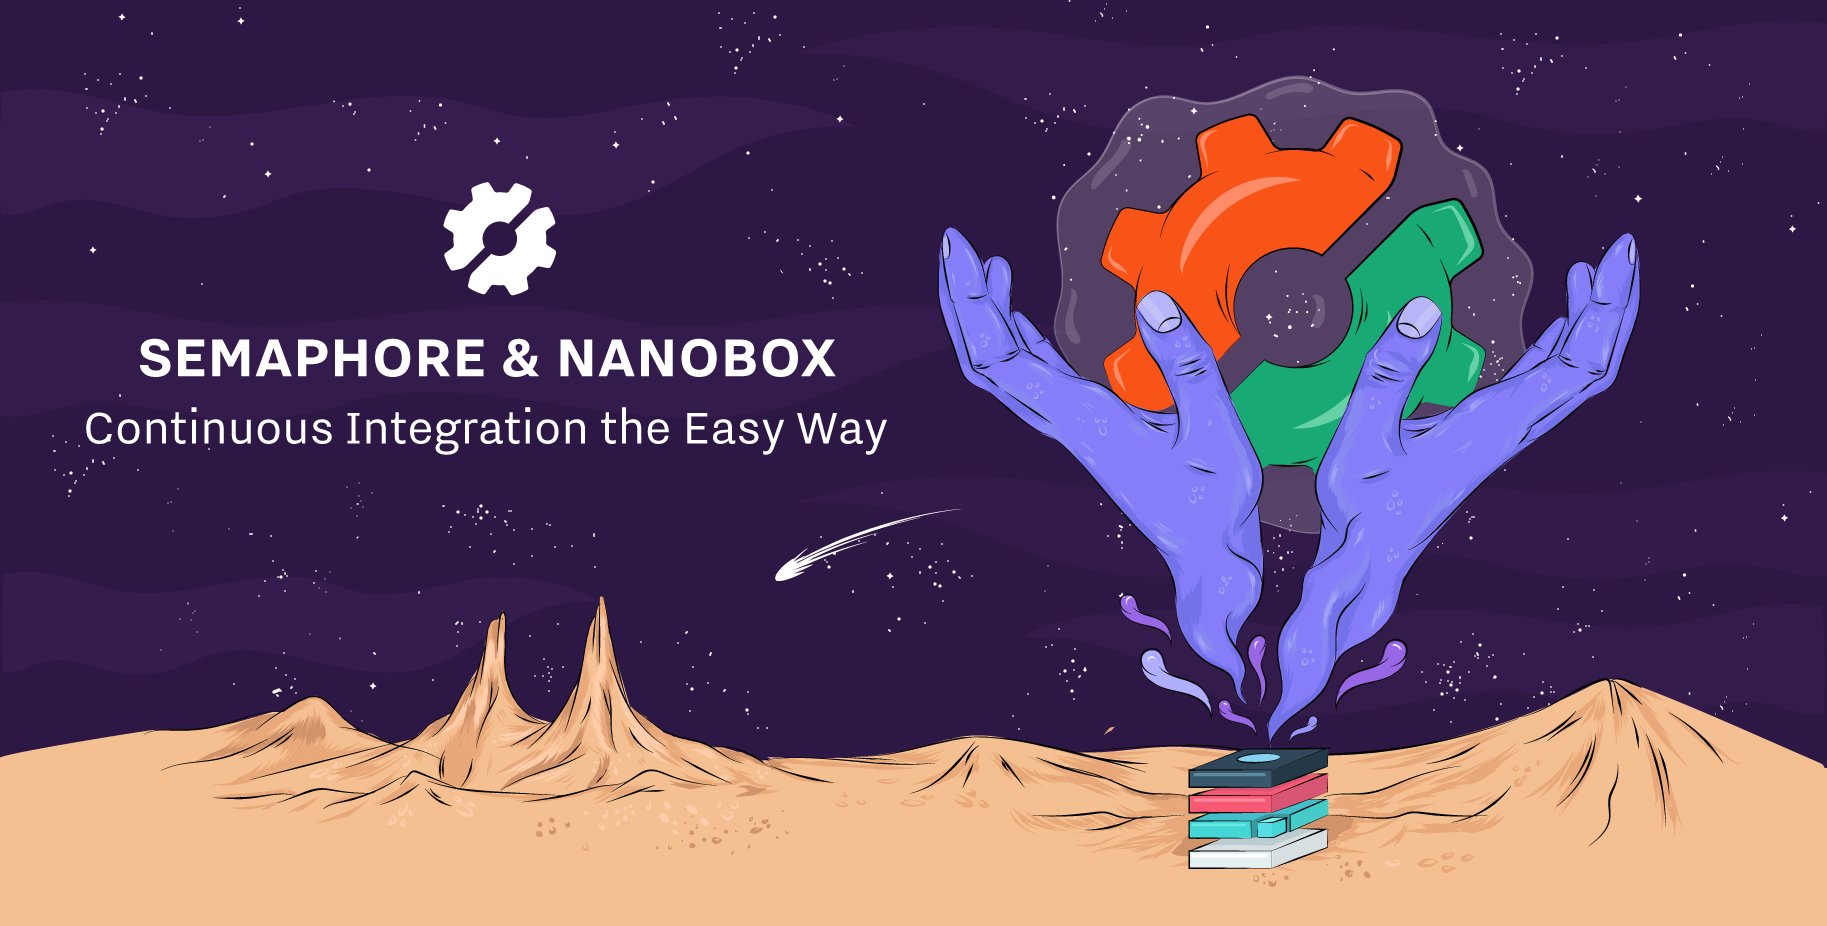 Semaphore and Nanobox - Continuous Integration the Easy Way